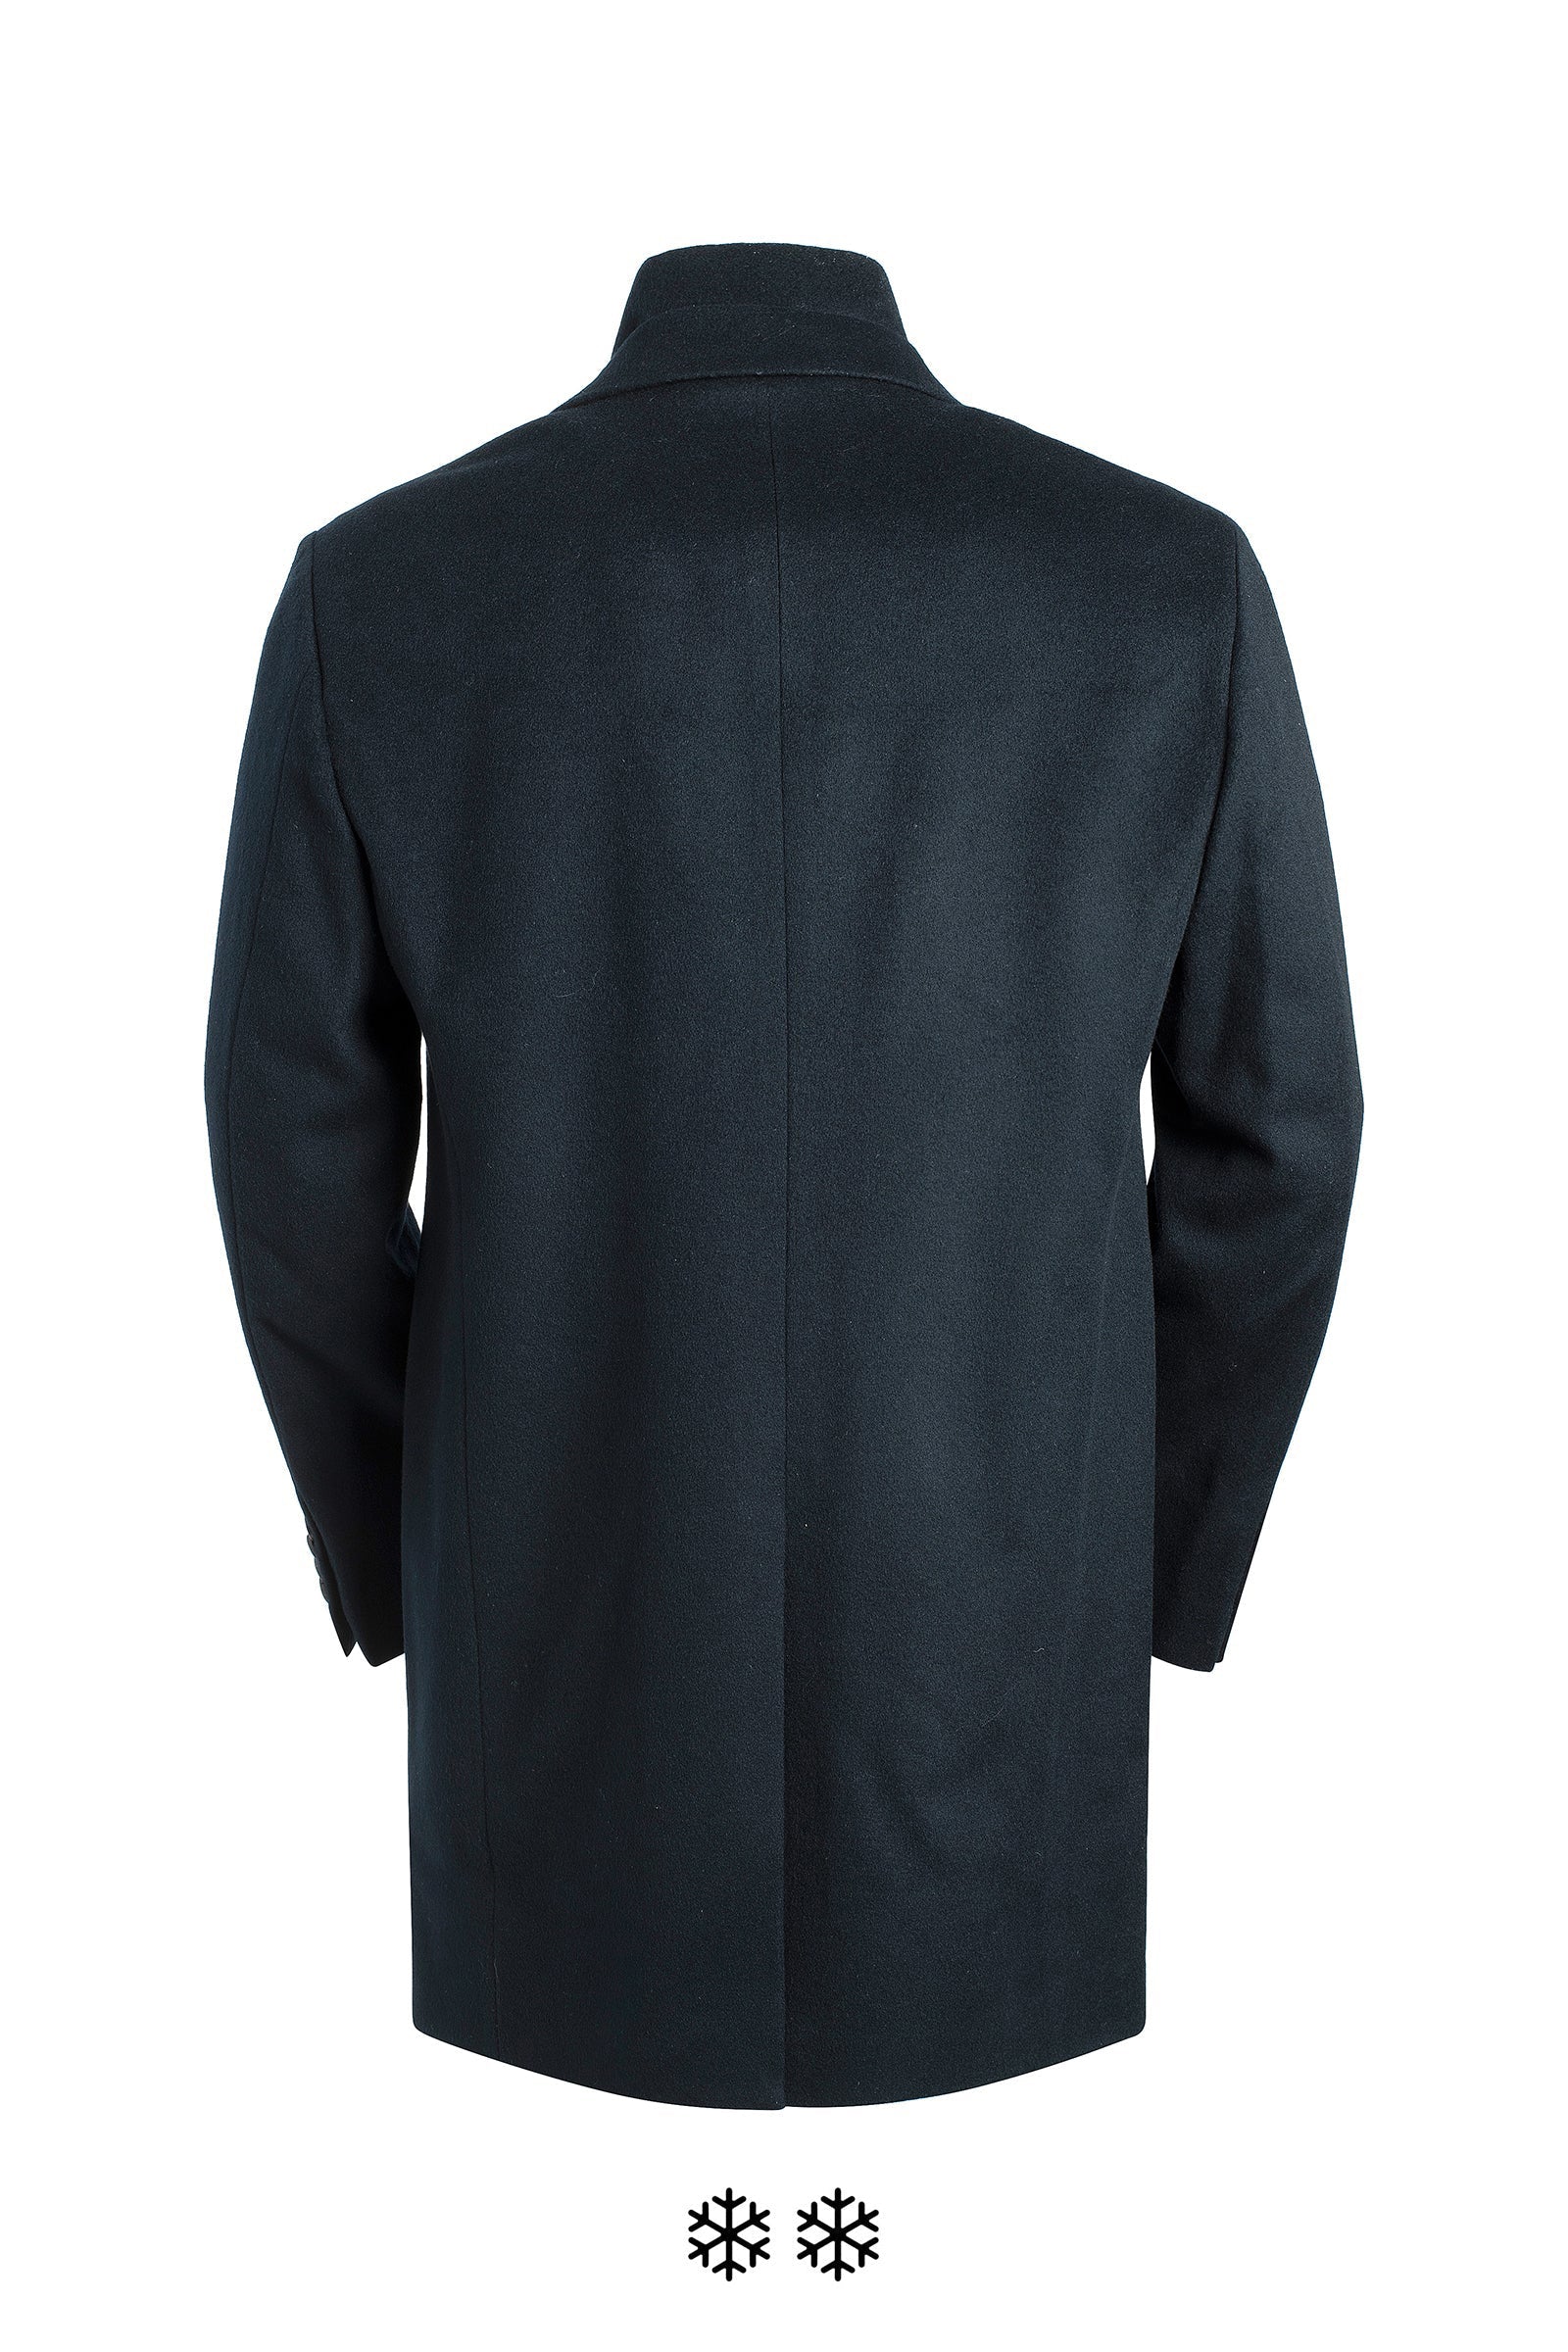 TERRENCE NAVY WOOL & CASHMERE TOPCOAT - Cardinal of Canada-CA - Terrence navy wool and cashmere topcoat